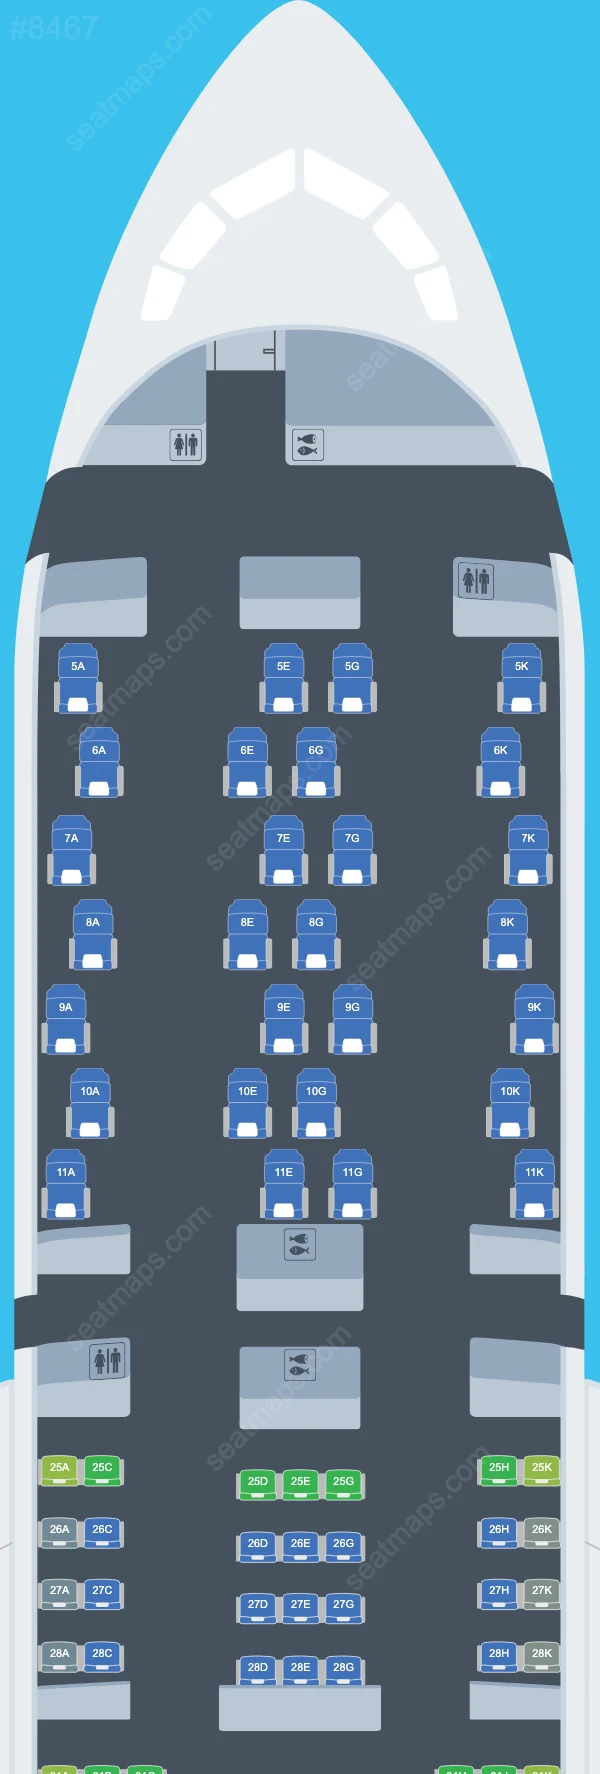 China Southern Boeing 787 Seat Maps 787-9 V.2